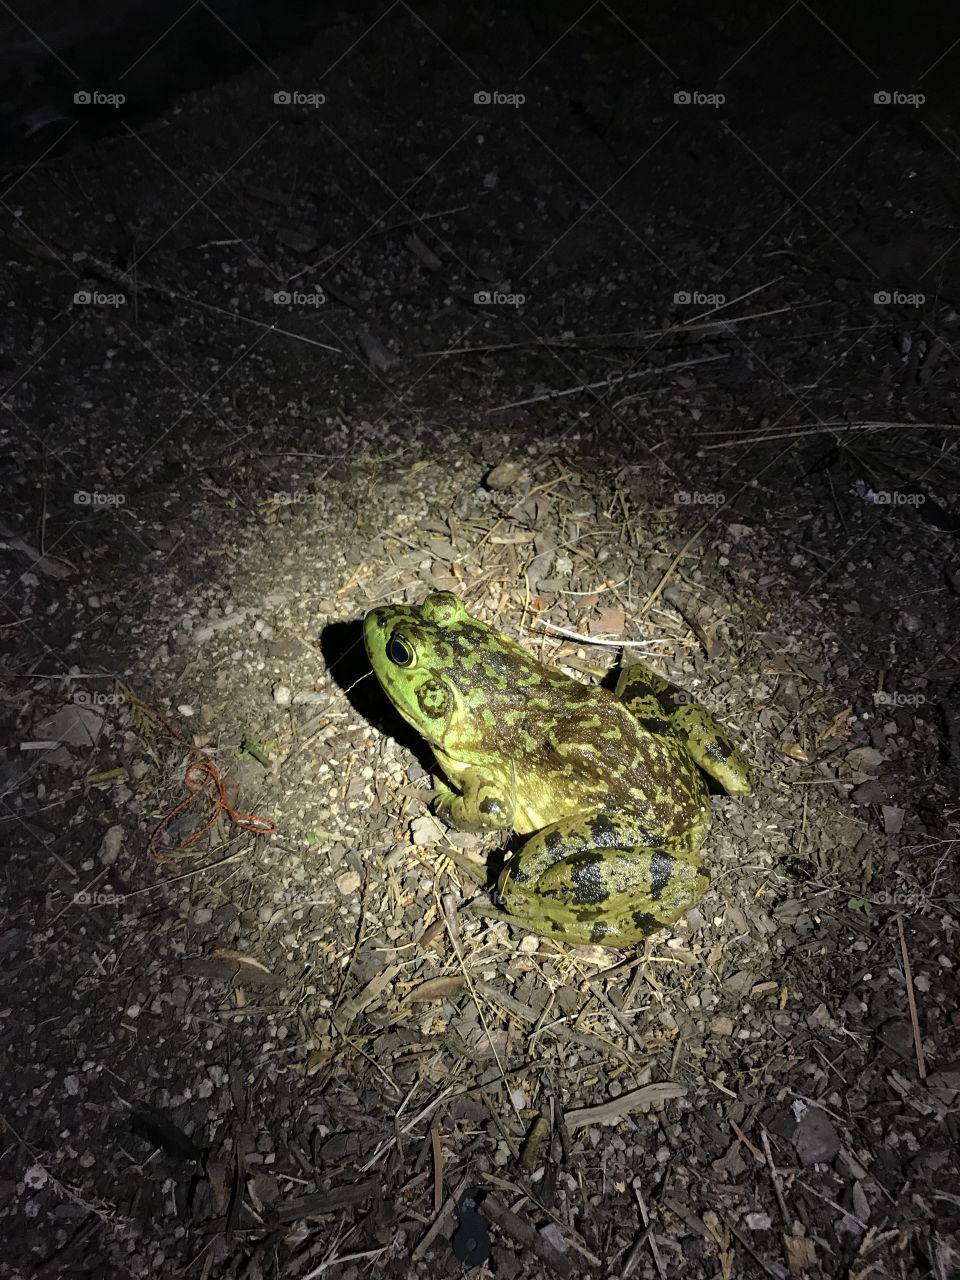 Frog? Toad? I don’t know, I’m no expert.